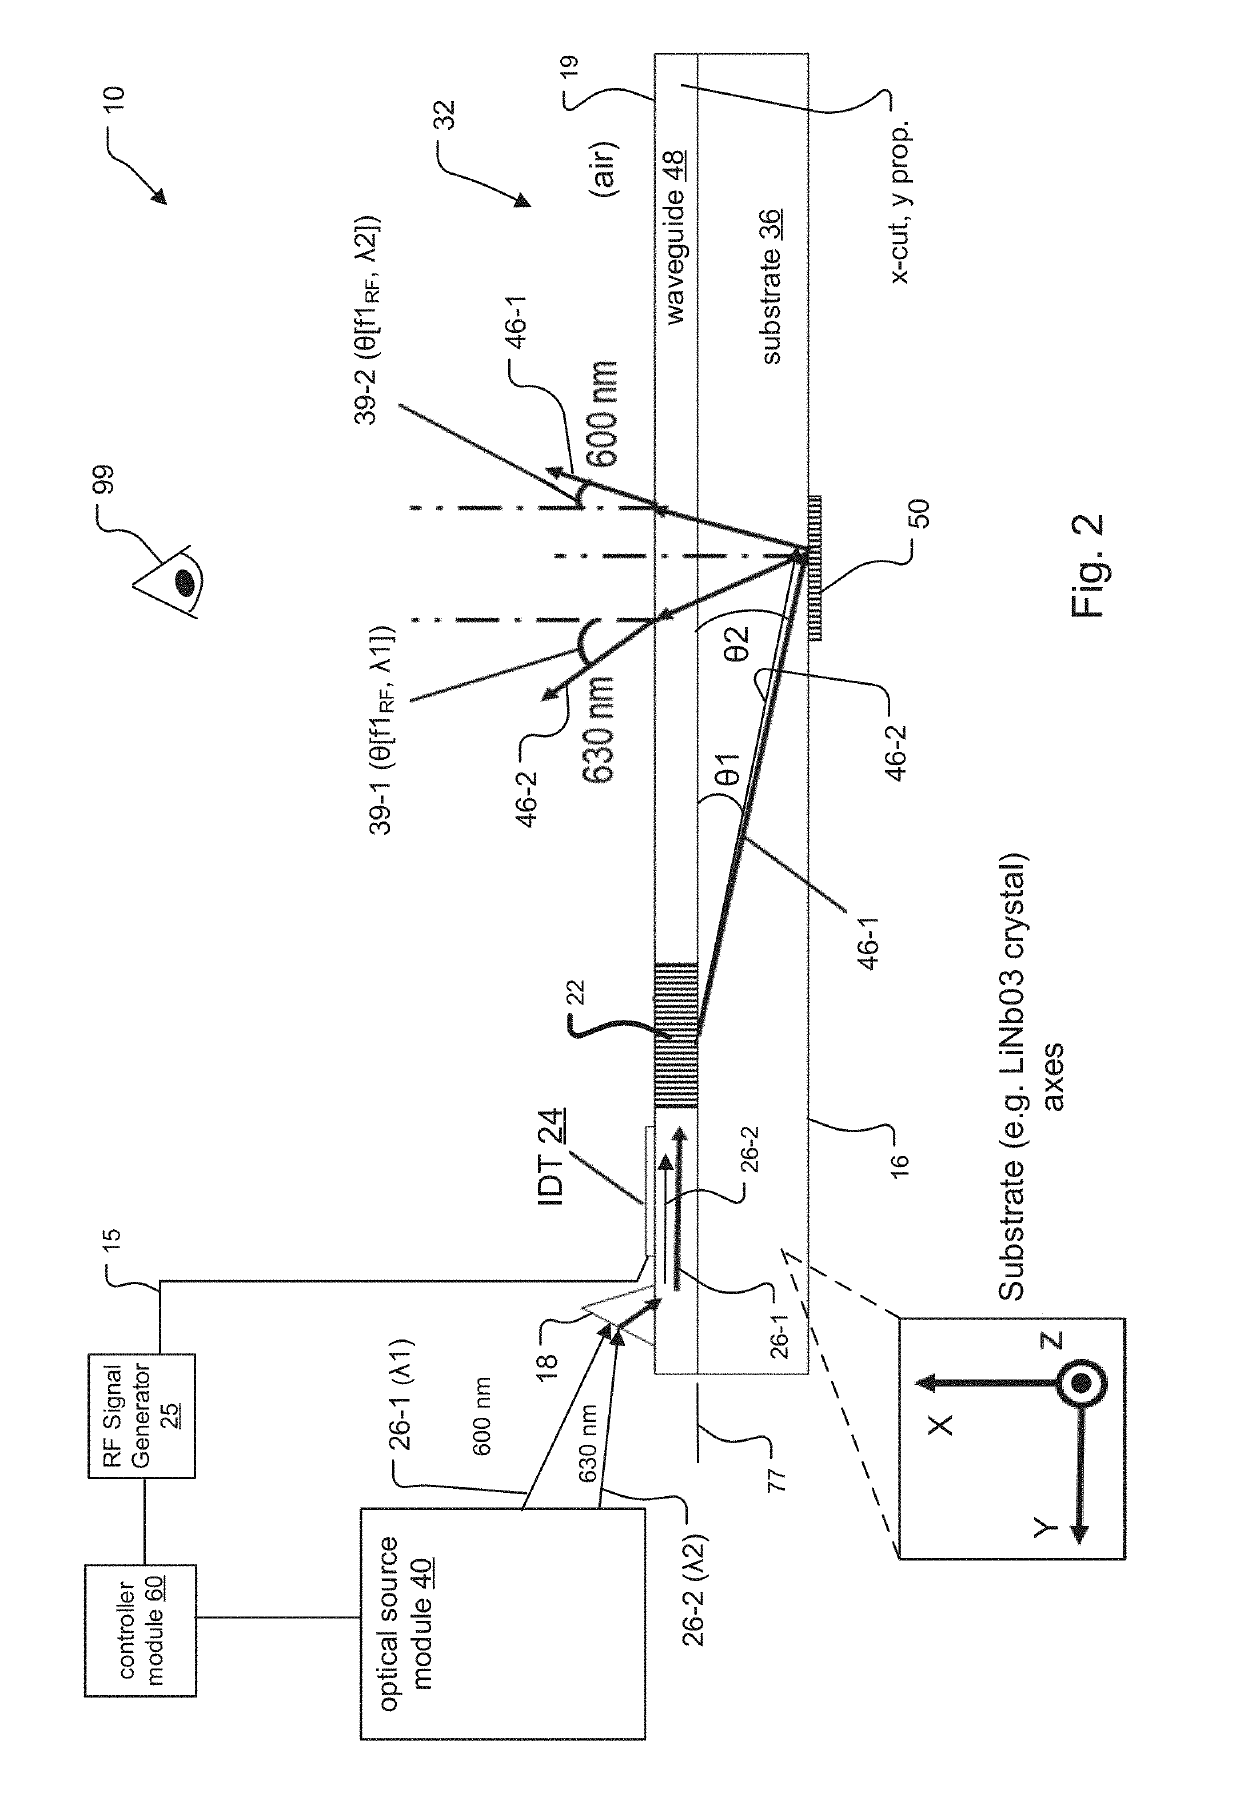 System and Method for Diffractive Steering of Electromagnetic Radiation